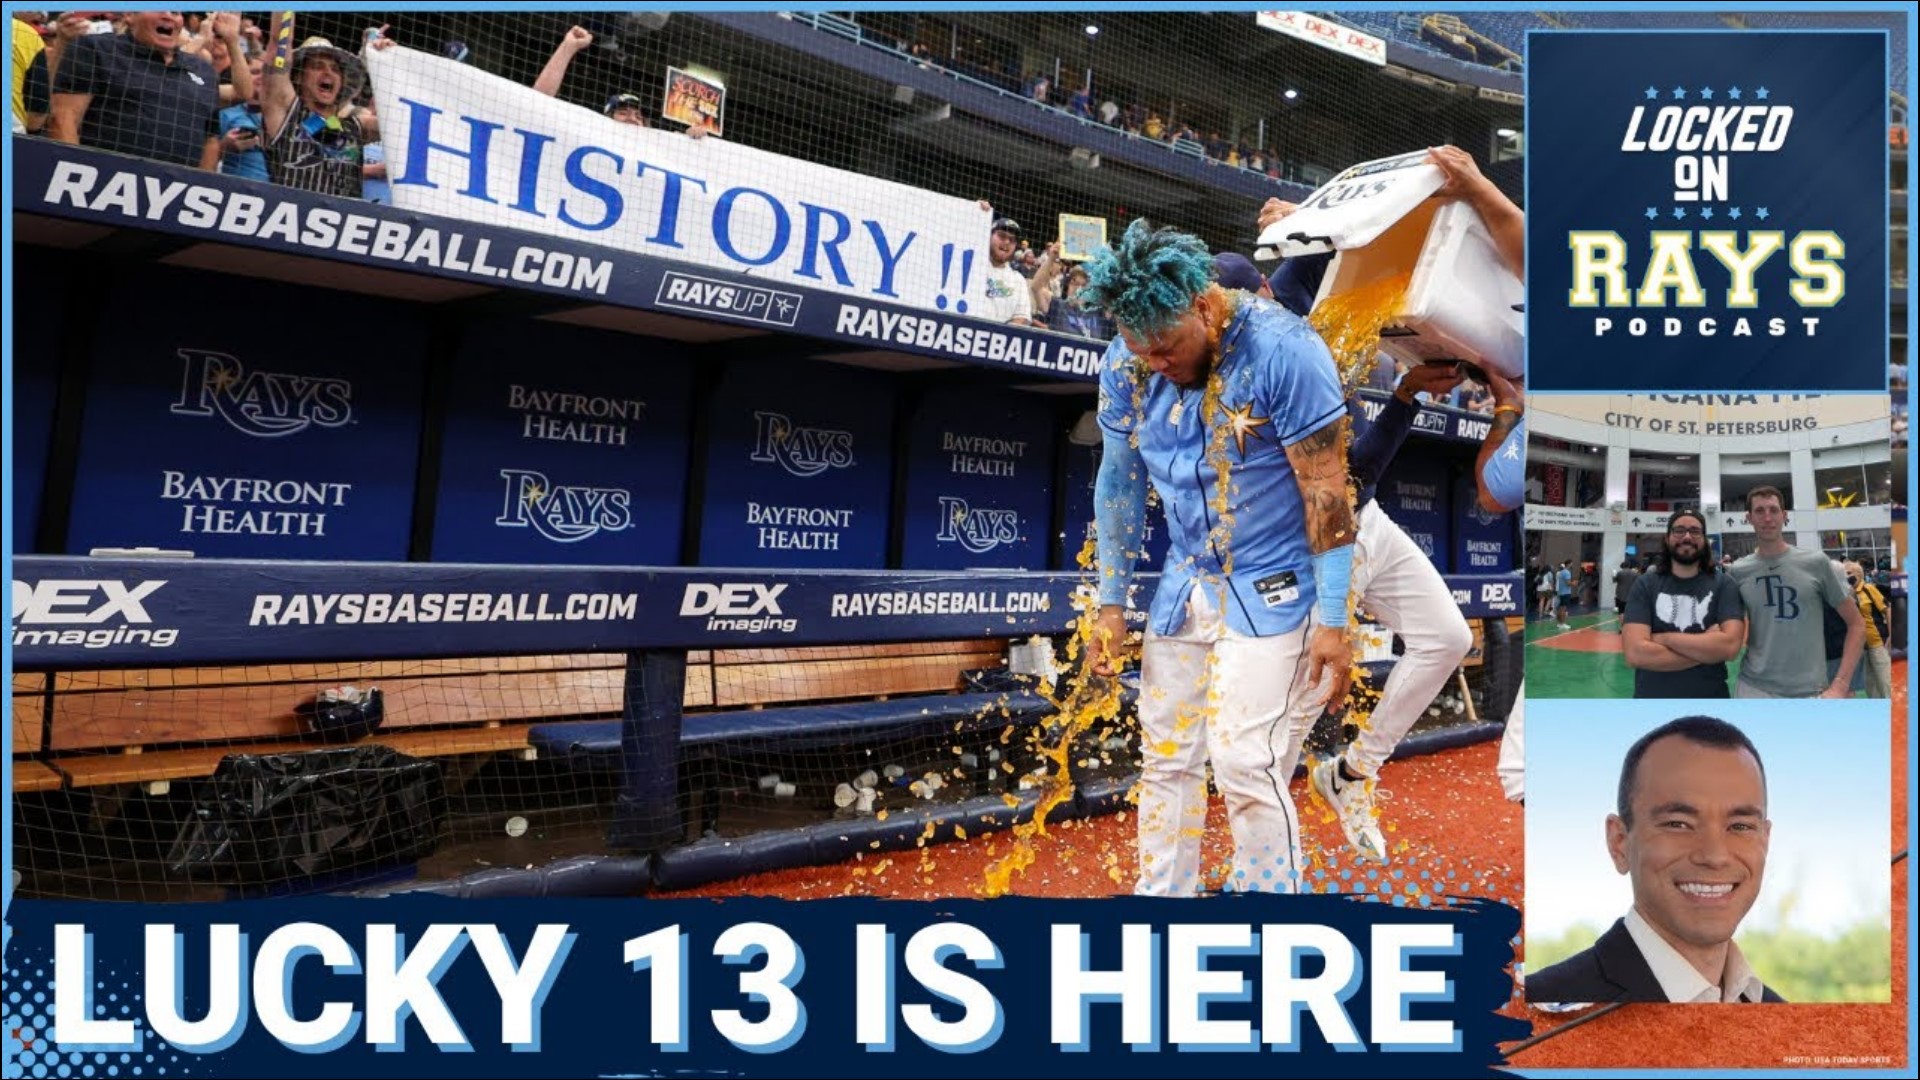 The Tampa Bay Rays have done it again! They completed the four-game sweep of the Boston Red Sox, with back-to-back comeback wins on Wednesday and Thursday.